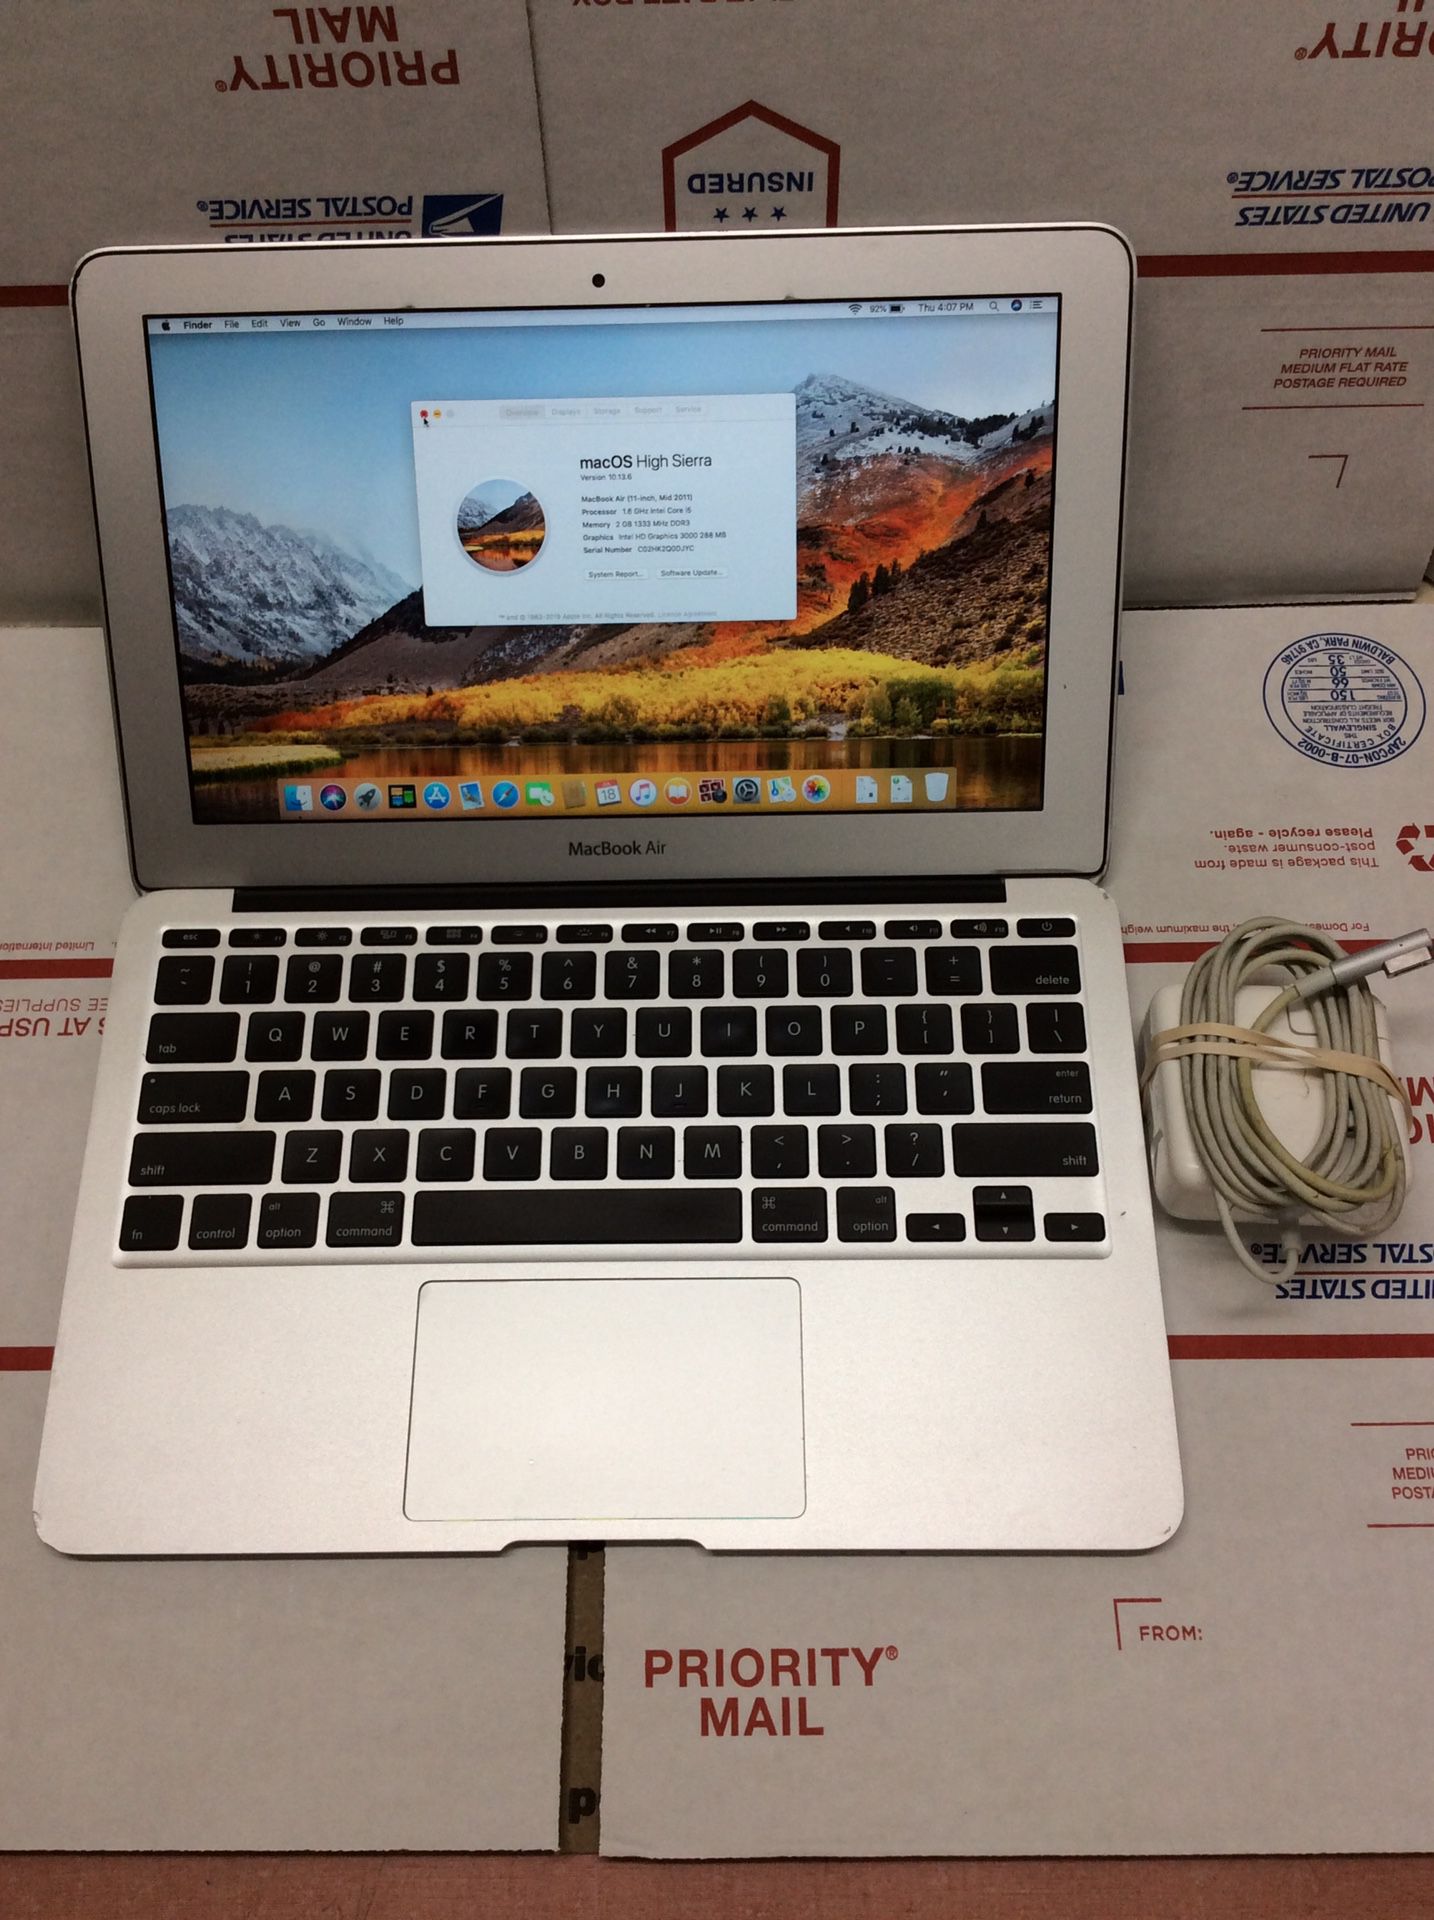 Apple MacBook Air 11.3” A1370 Mid 2011, i5 1.6GHz, 2GB RAM, 60GB SSD 🔥🔥🔥💻😳 Factory Reset updated latest iOS High Sierra w/charger